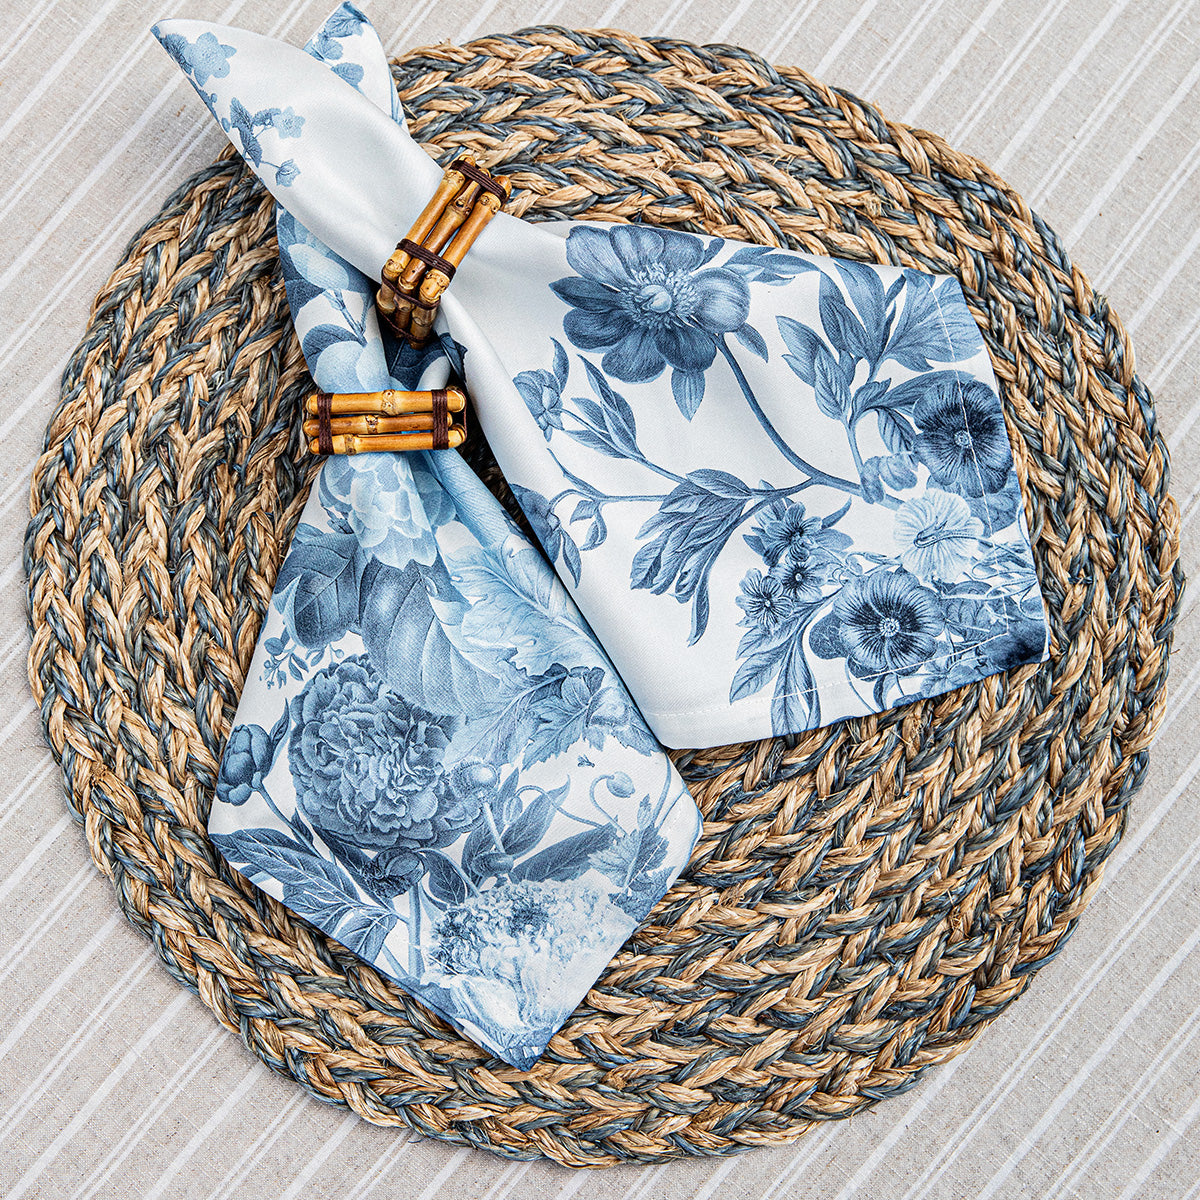 Woven Straw Placemat - Chambray